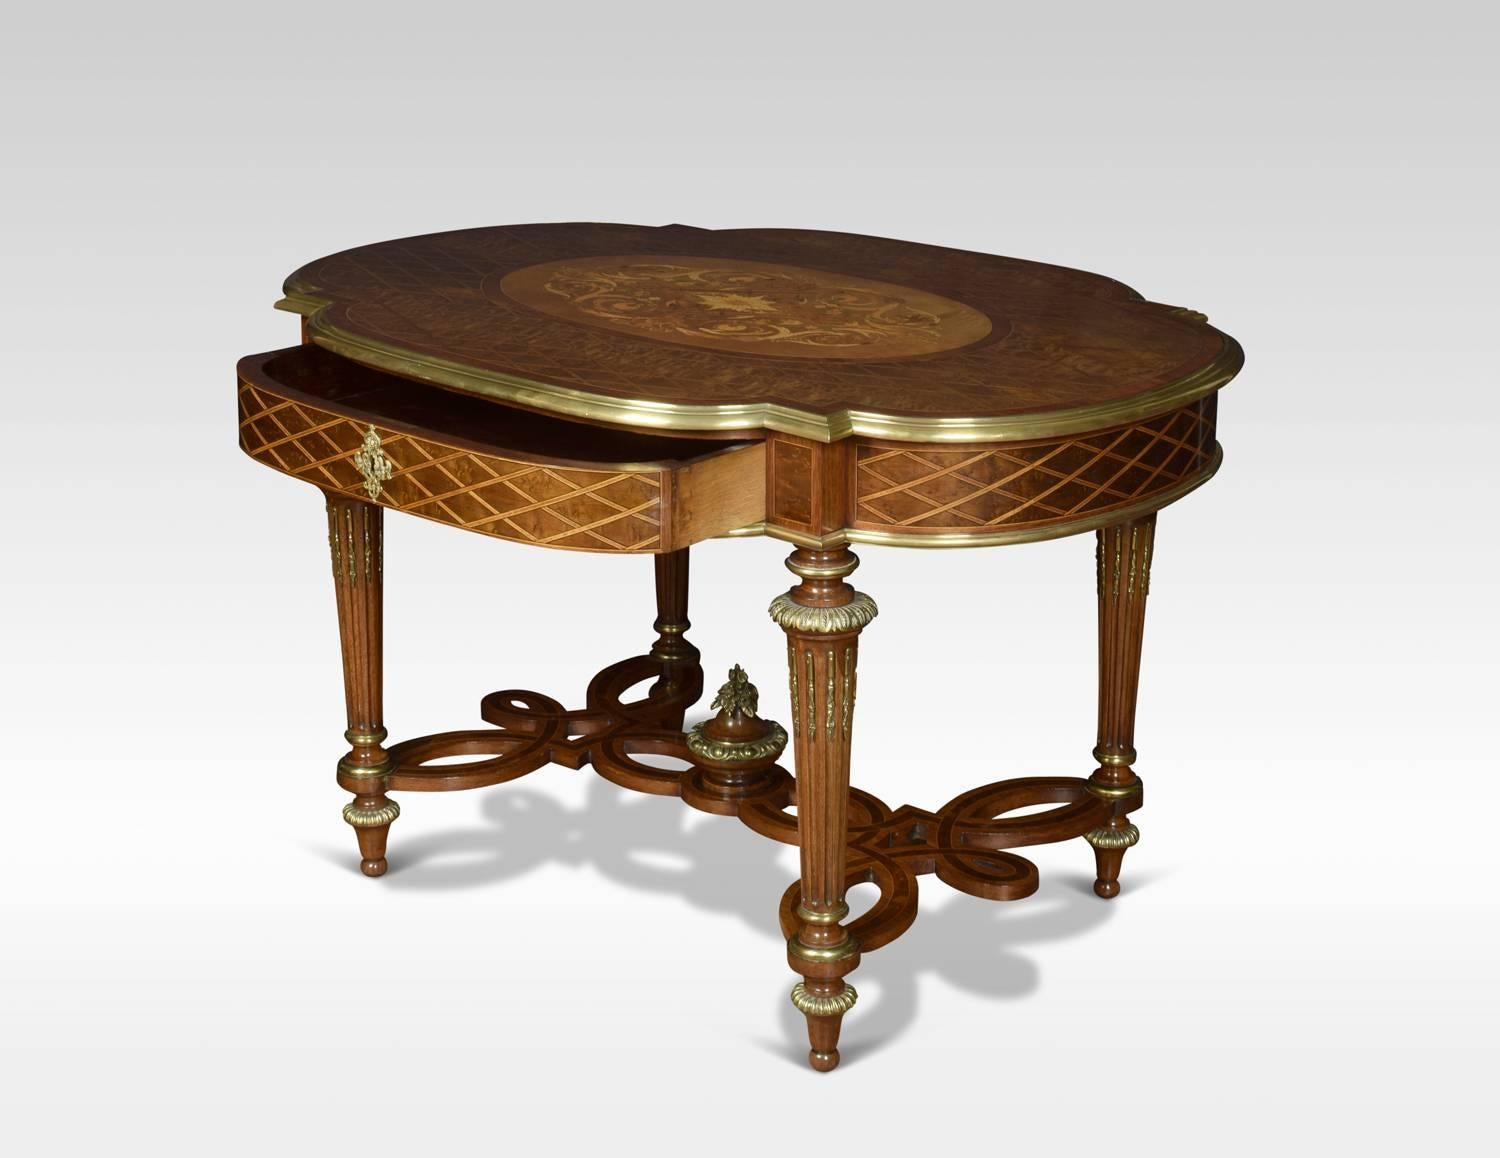 A centre table of exceptional quality, utilizing beautifully grained woods, including walnut, thuya, rosewood, tulipwood, amaranth and fruitwood. Adorned with very fine planished and gilded ormolu mounts. The shaped parquetry top, with everted